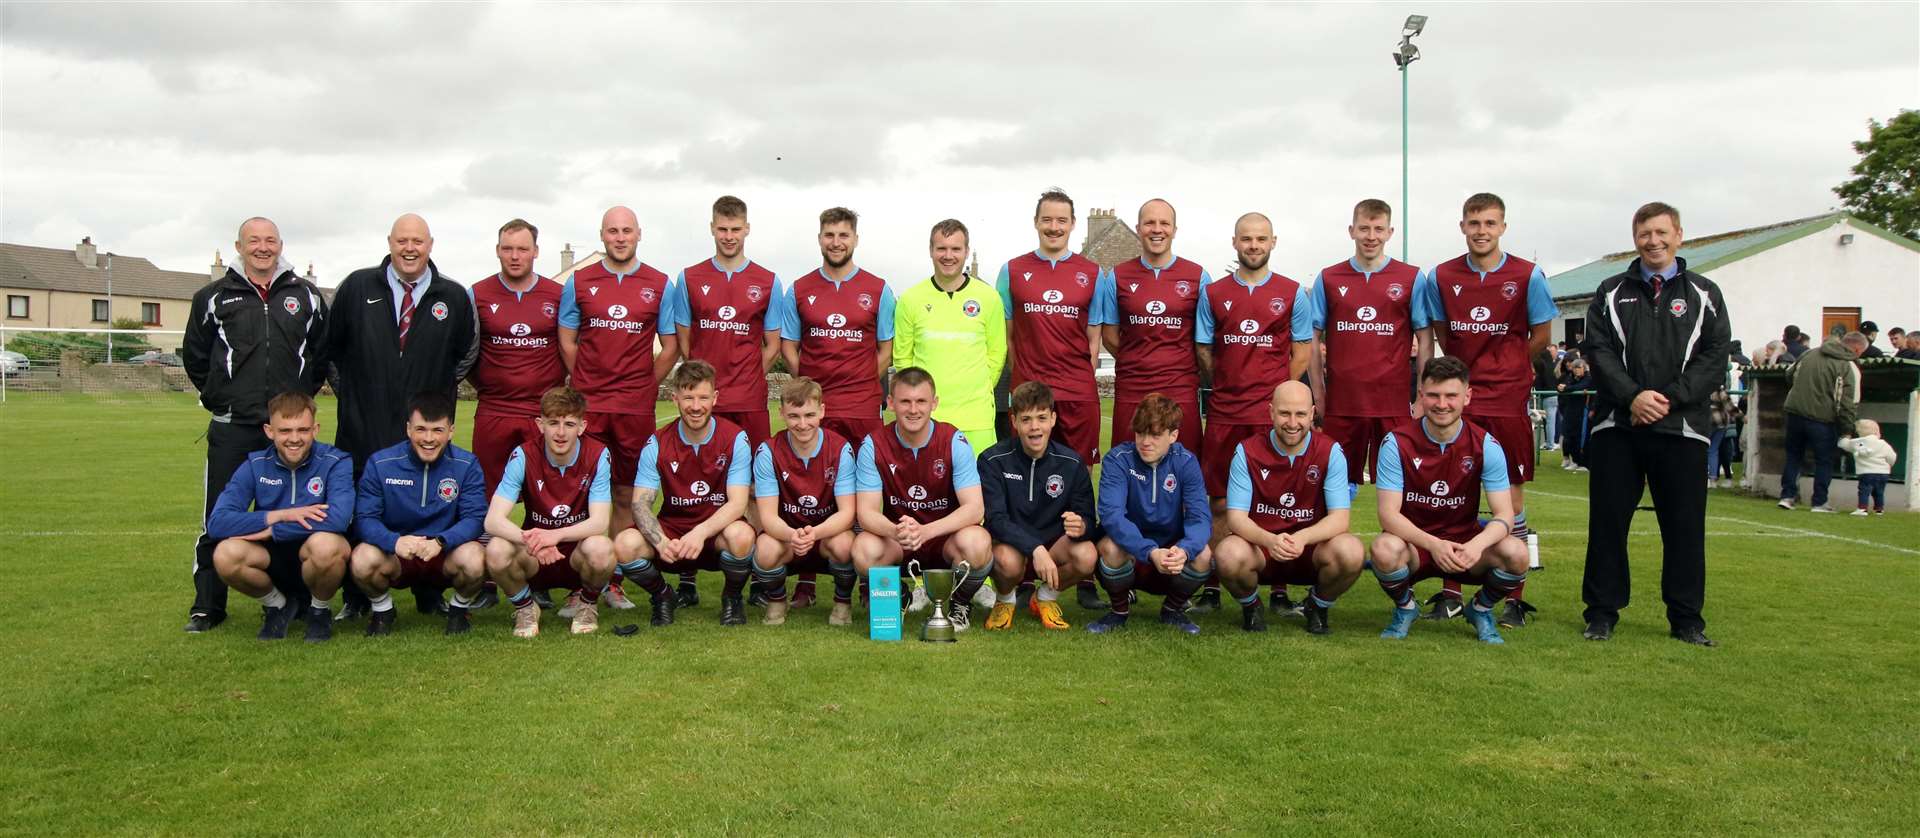 Pentland United players and officials after winning the Colin Macleod Memorial Cup in Castletown on Saturday. Picture: James Gunn